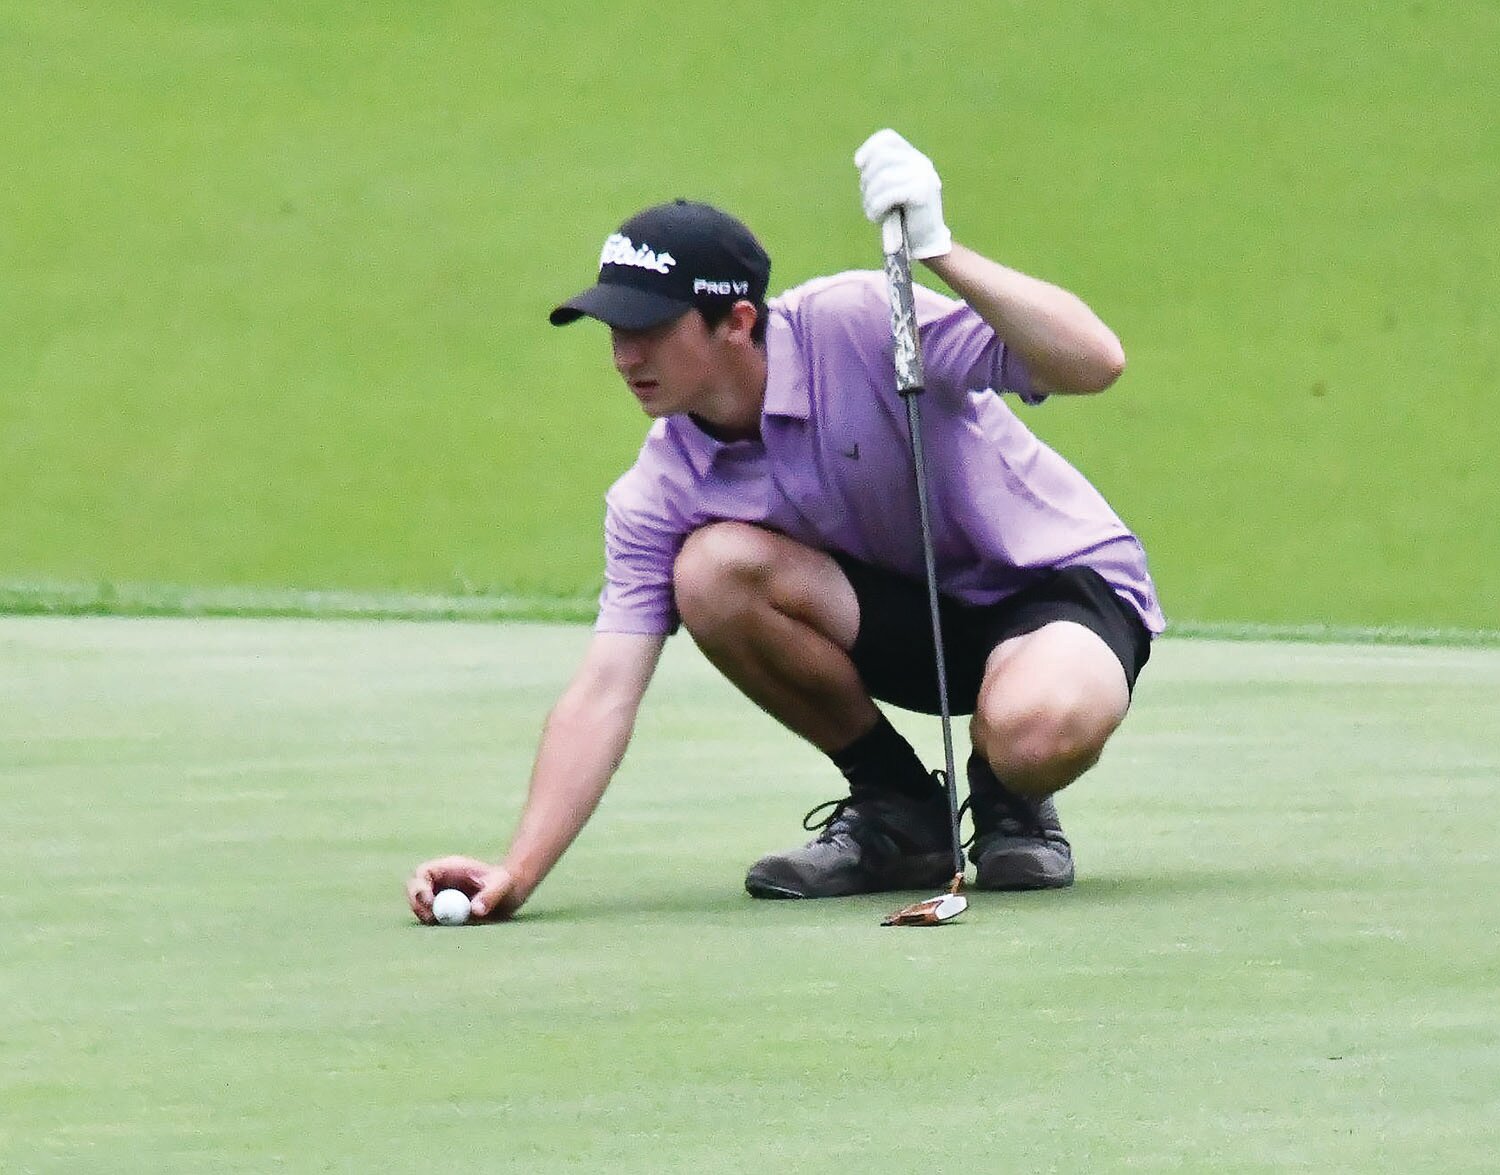 Salisbury's Nolan Gordon (top) addresses his ball on a green during the Class 1 state tournament in Columbia.